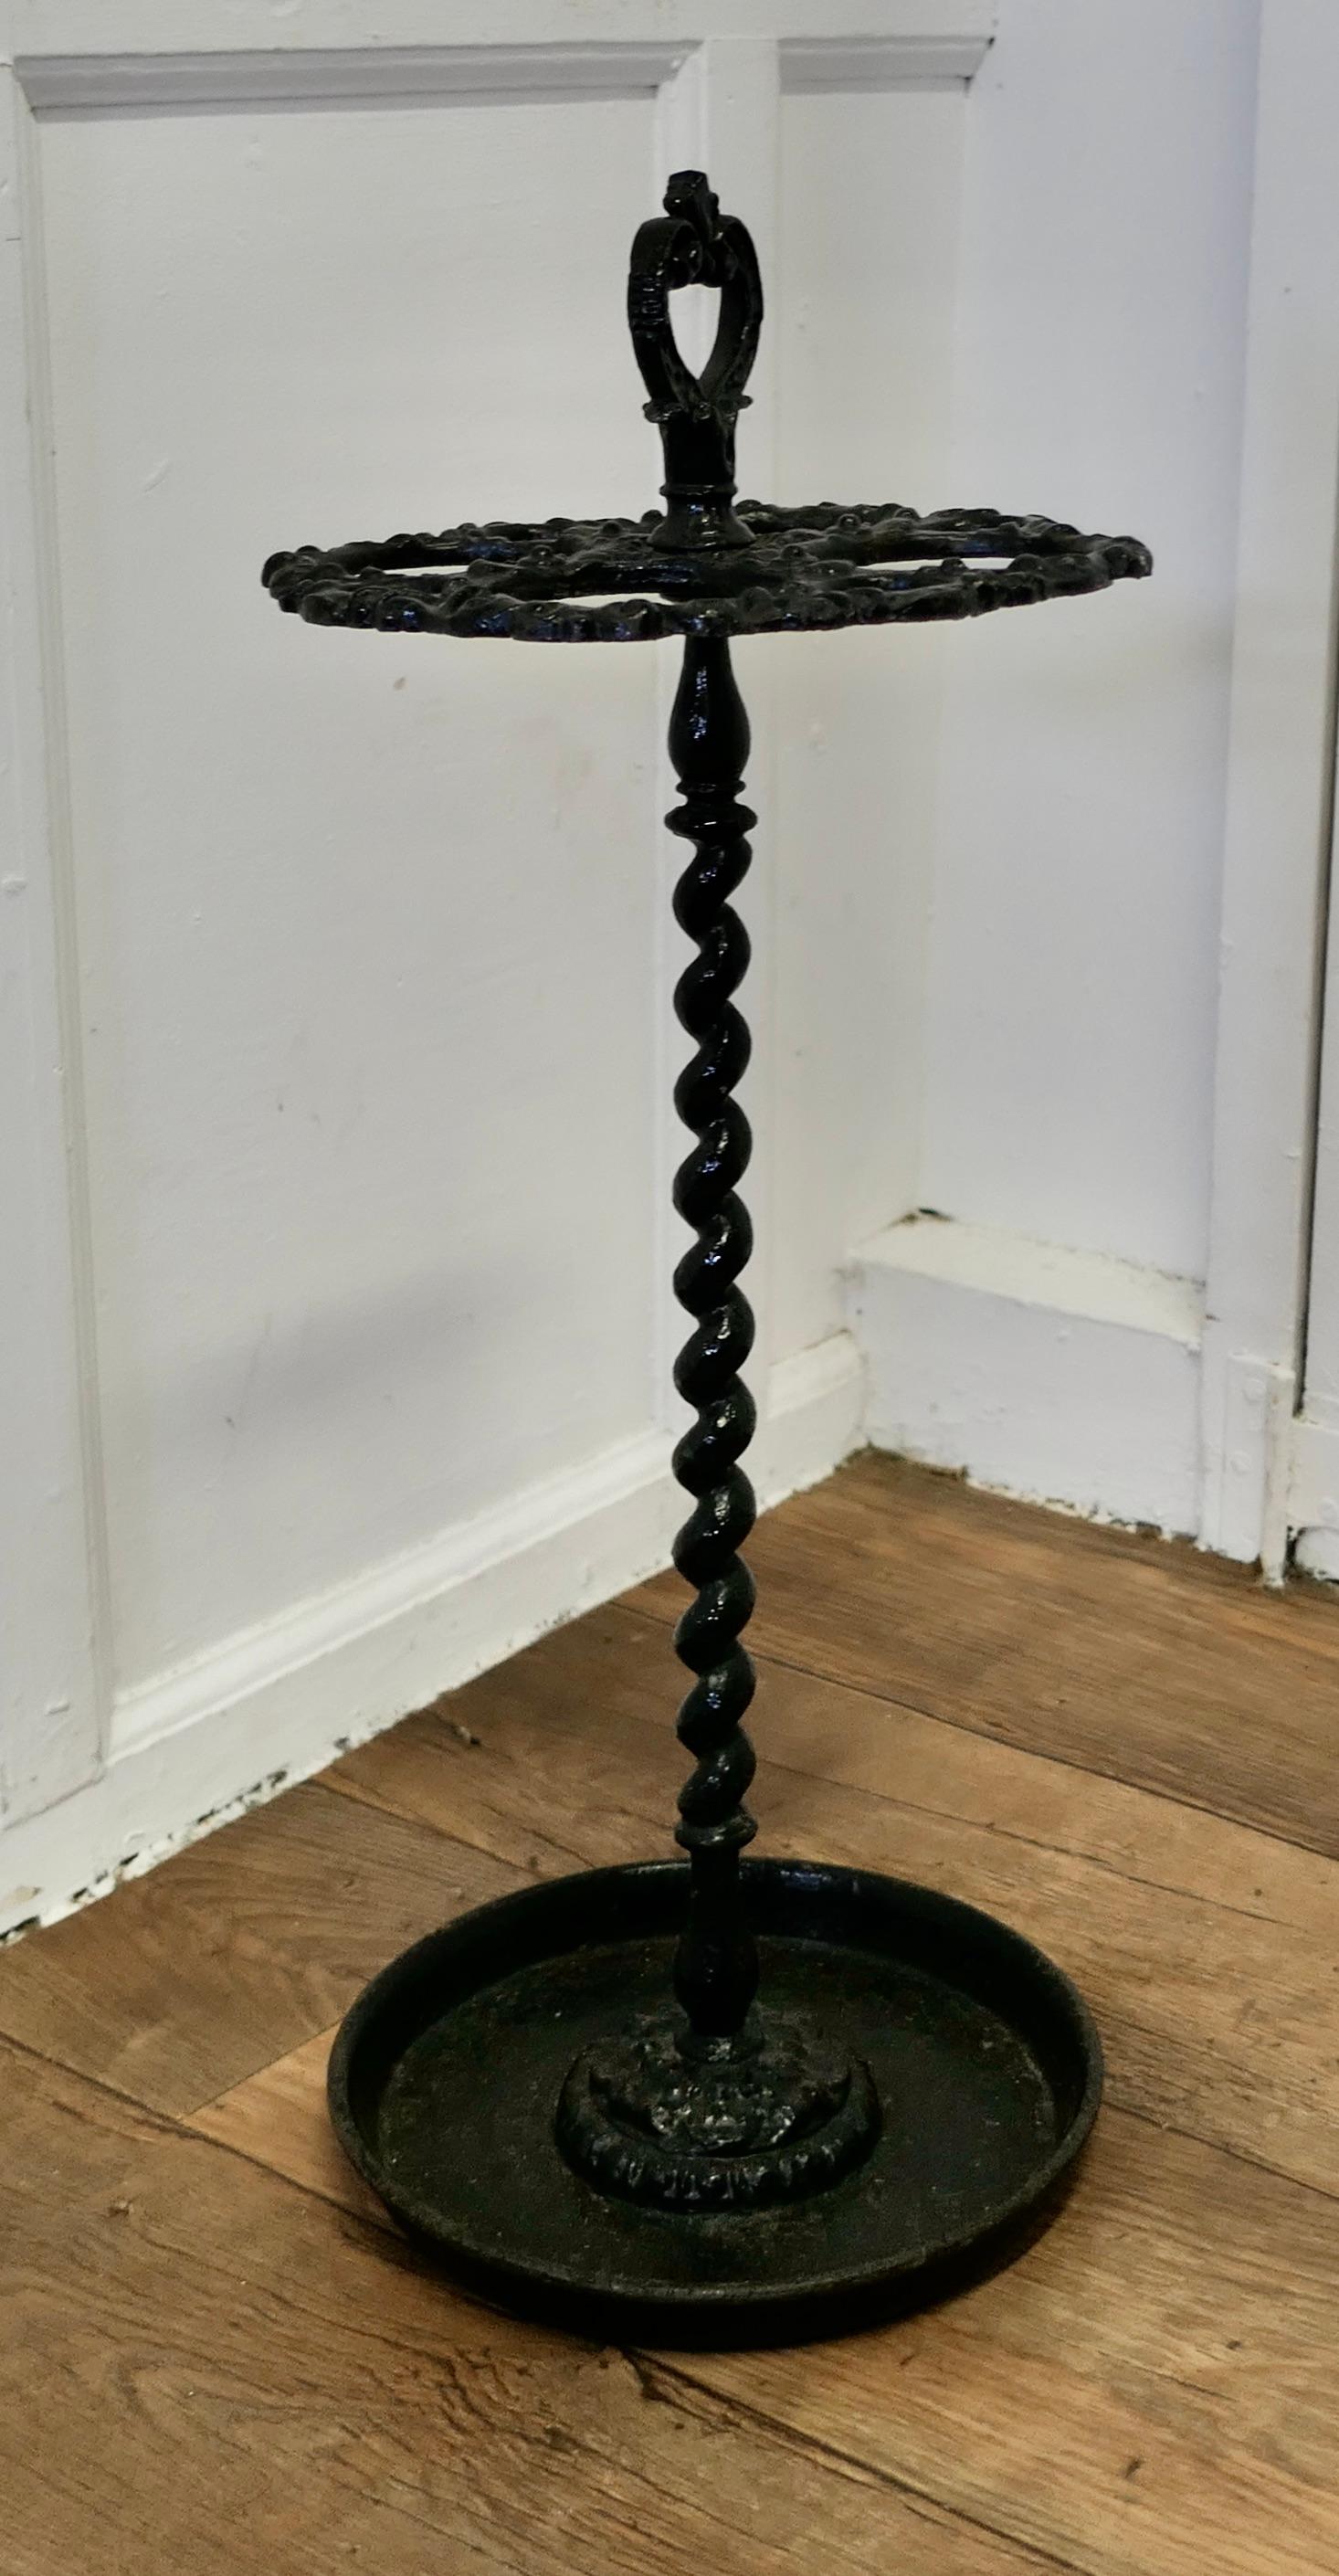 A French Cast Iron Walking Stick Stand or Umbrella Stand

A charming piece, the round stand is divided into 8 sections to hold either Walking Sticks or Umbrellas, the heavy iron base is also the drip tray and it has a handle on the top
The stand is